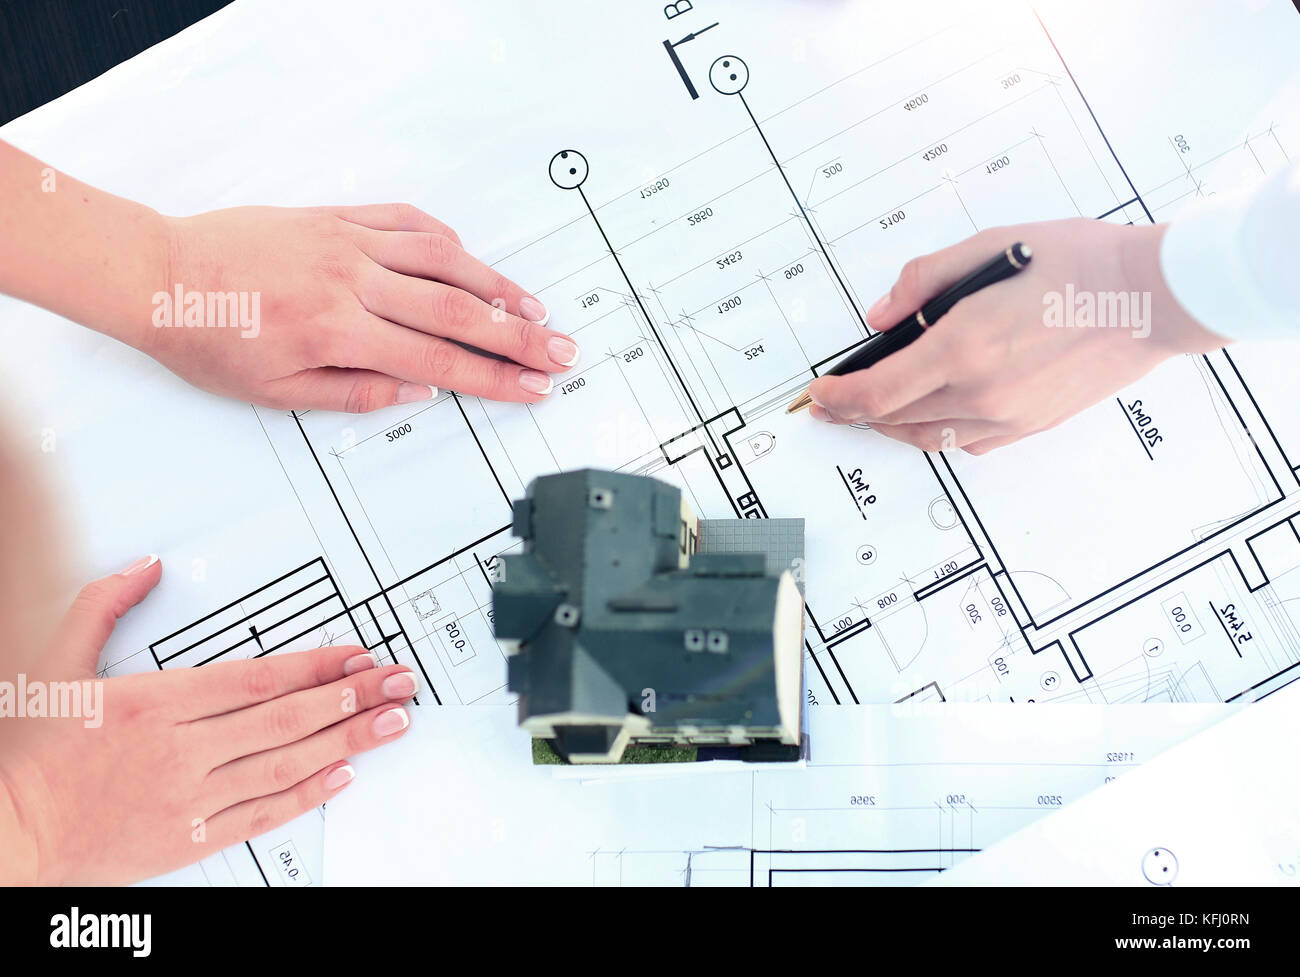 Image of new model house on architecture blueprint plan at desk Stock Photo